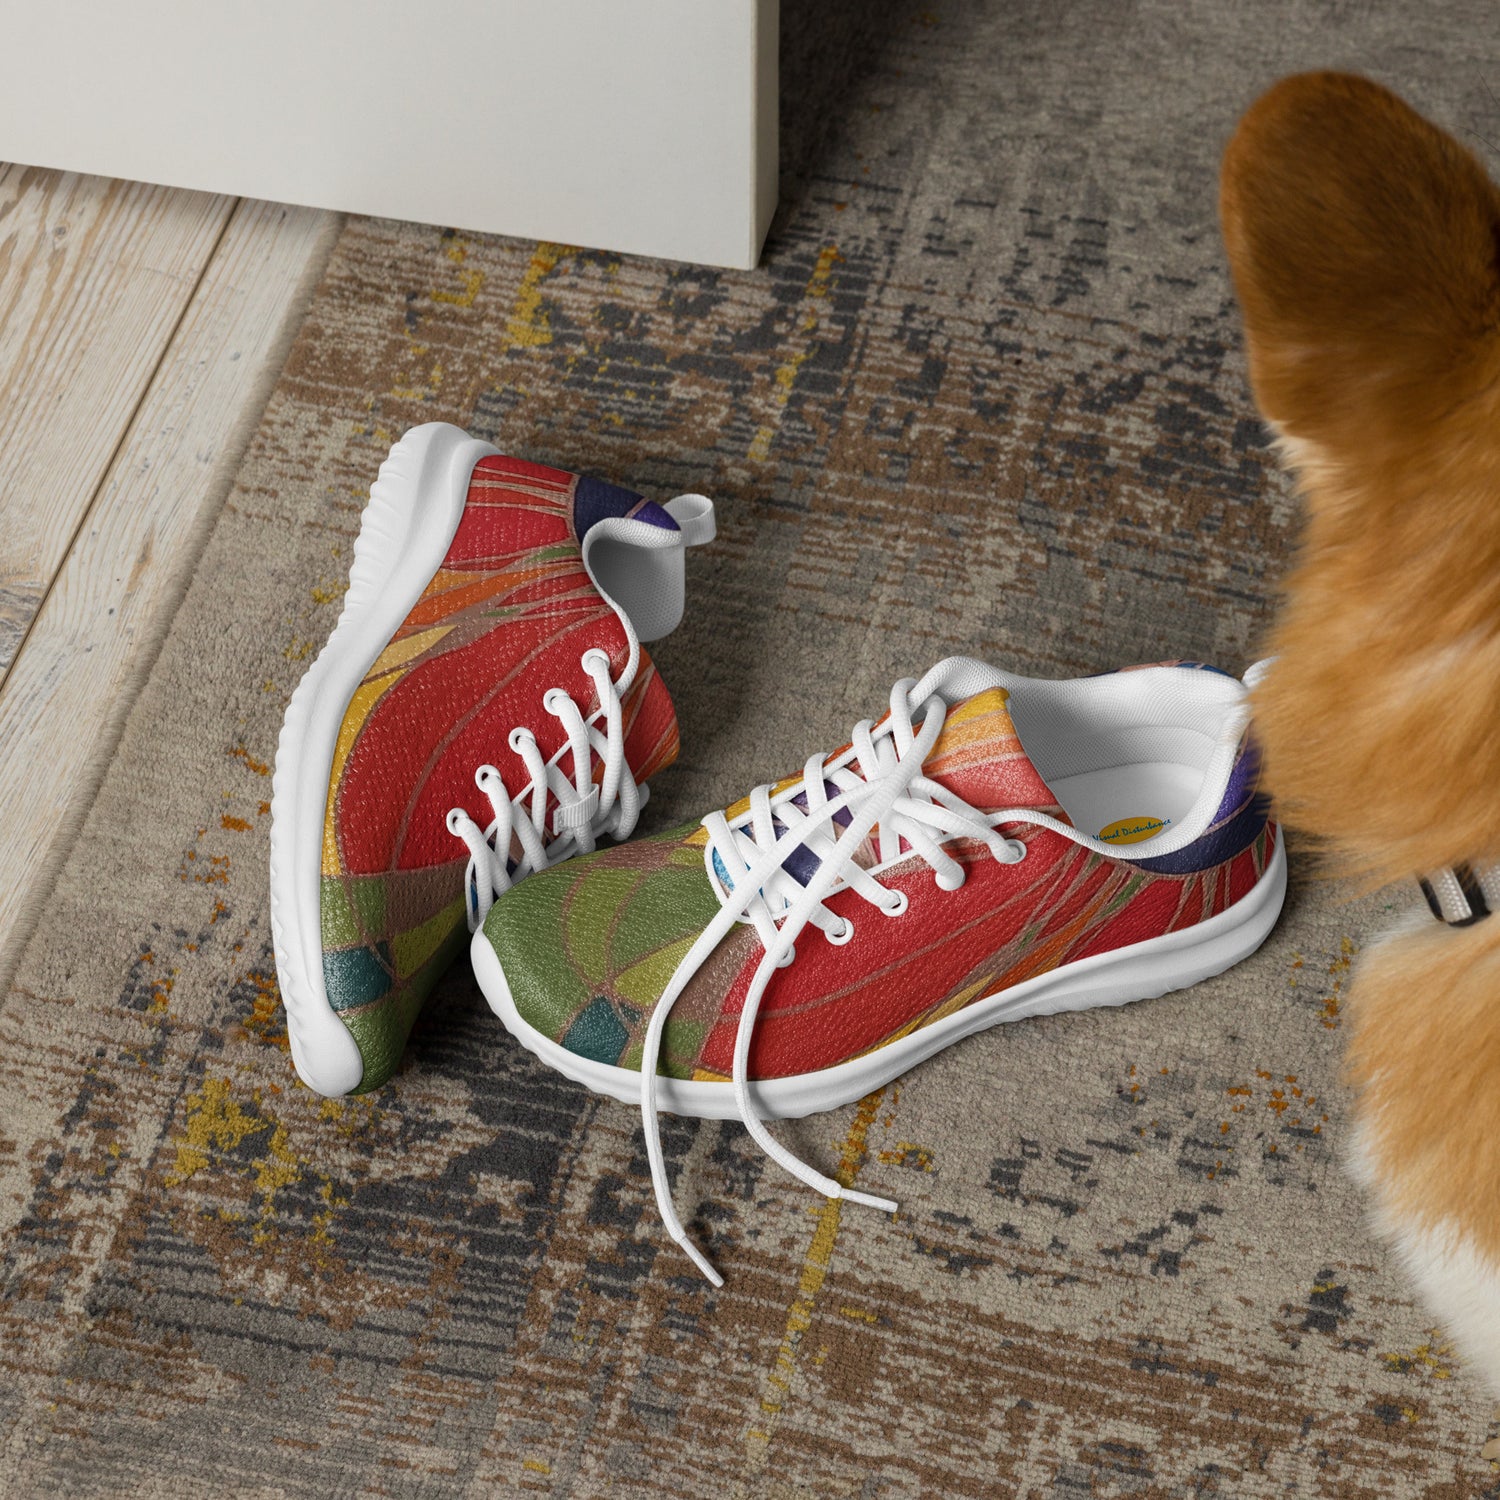 Athletic shoes lying on the floor next to a dog